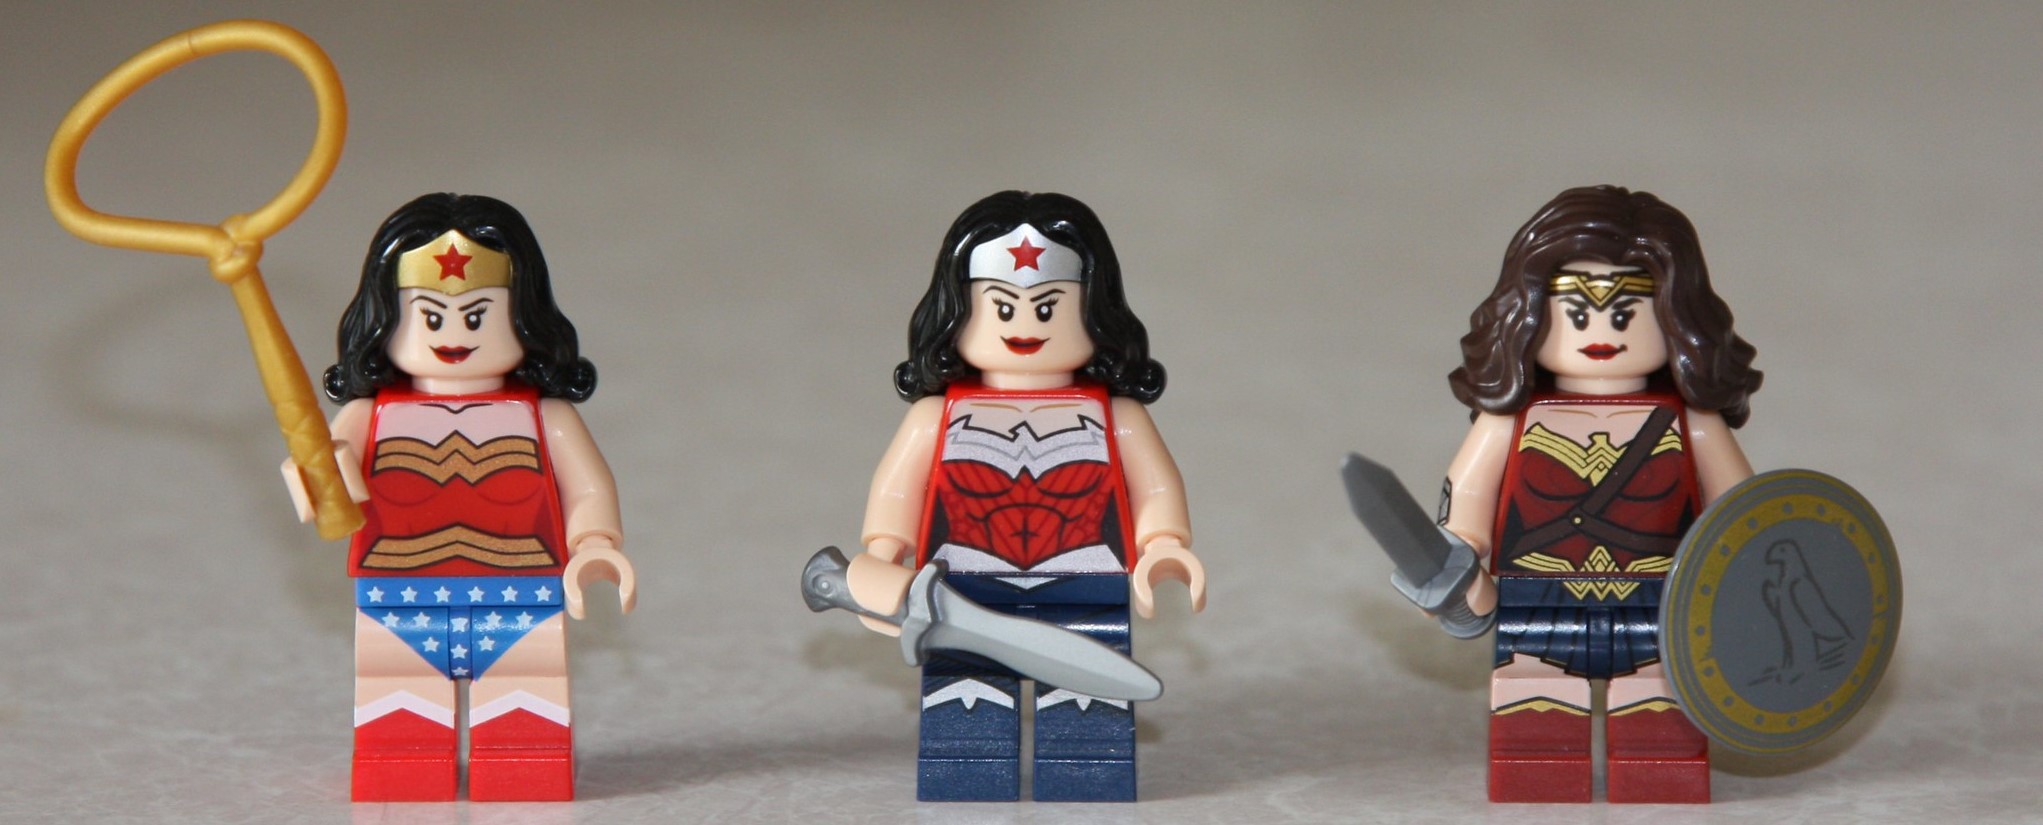 No matter which version of wonder woman it is, she always knows the fastest way to build muscle (fight for justice).